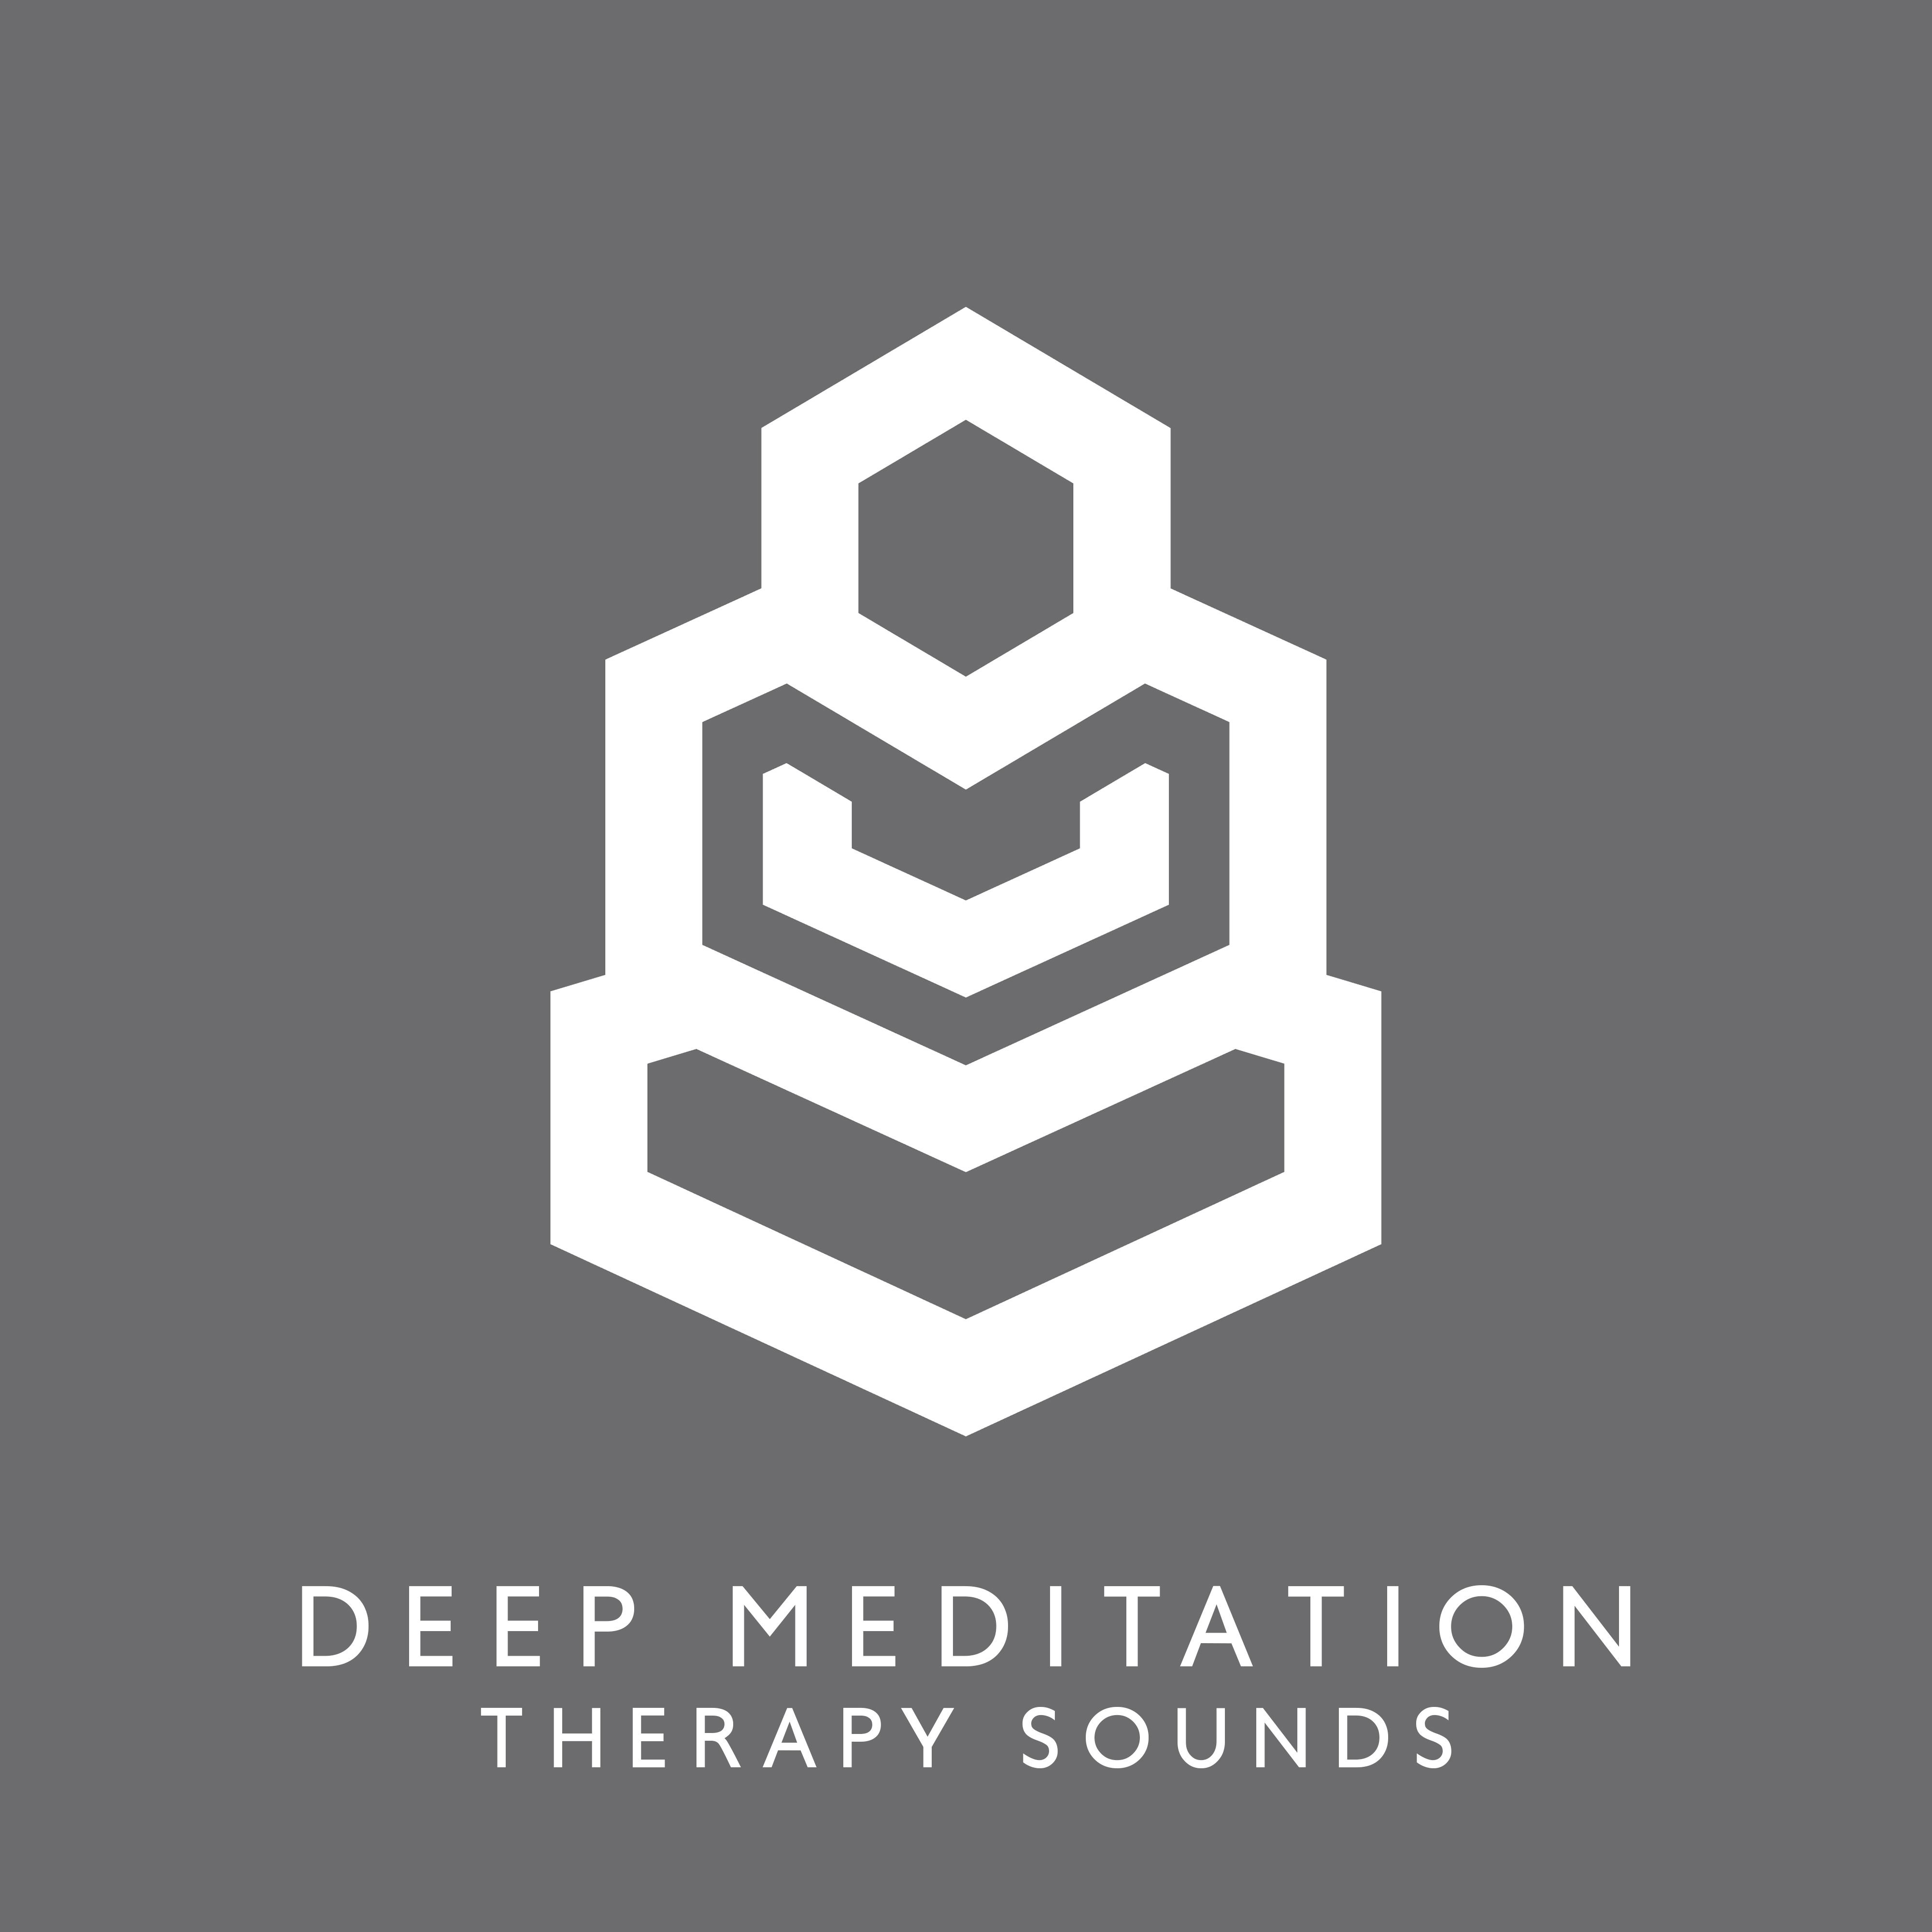 Deep Meditation Therapy Sounds: 15 New Age Relaxing Cosmic Songs for Yoga Training